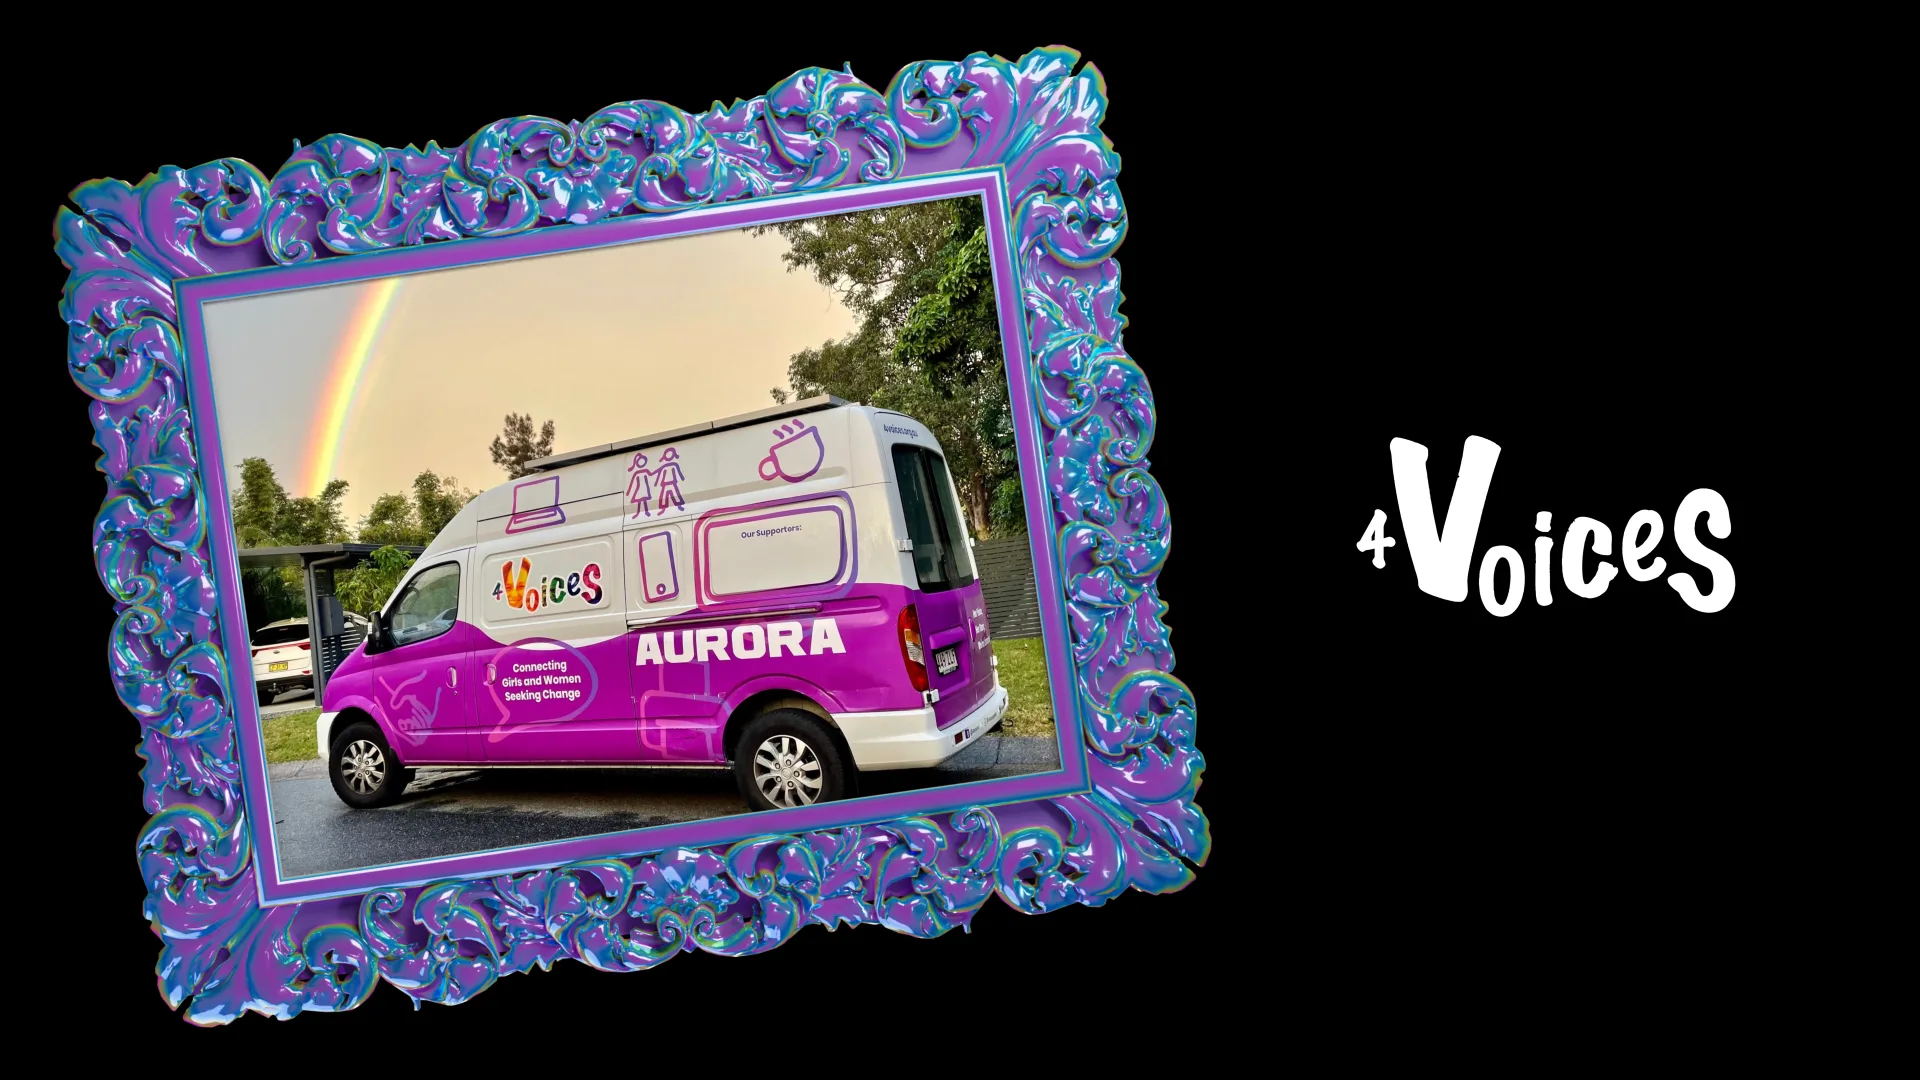 A framed image of the 4 Voices van, named Aurora, next to the 4 Voices logo.